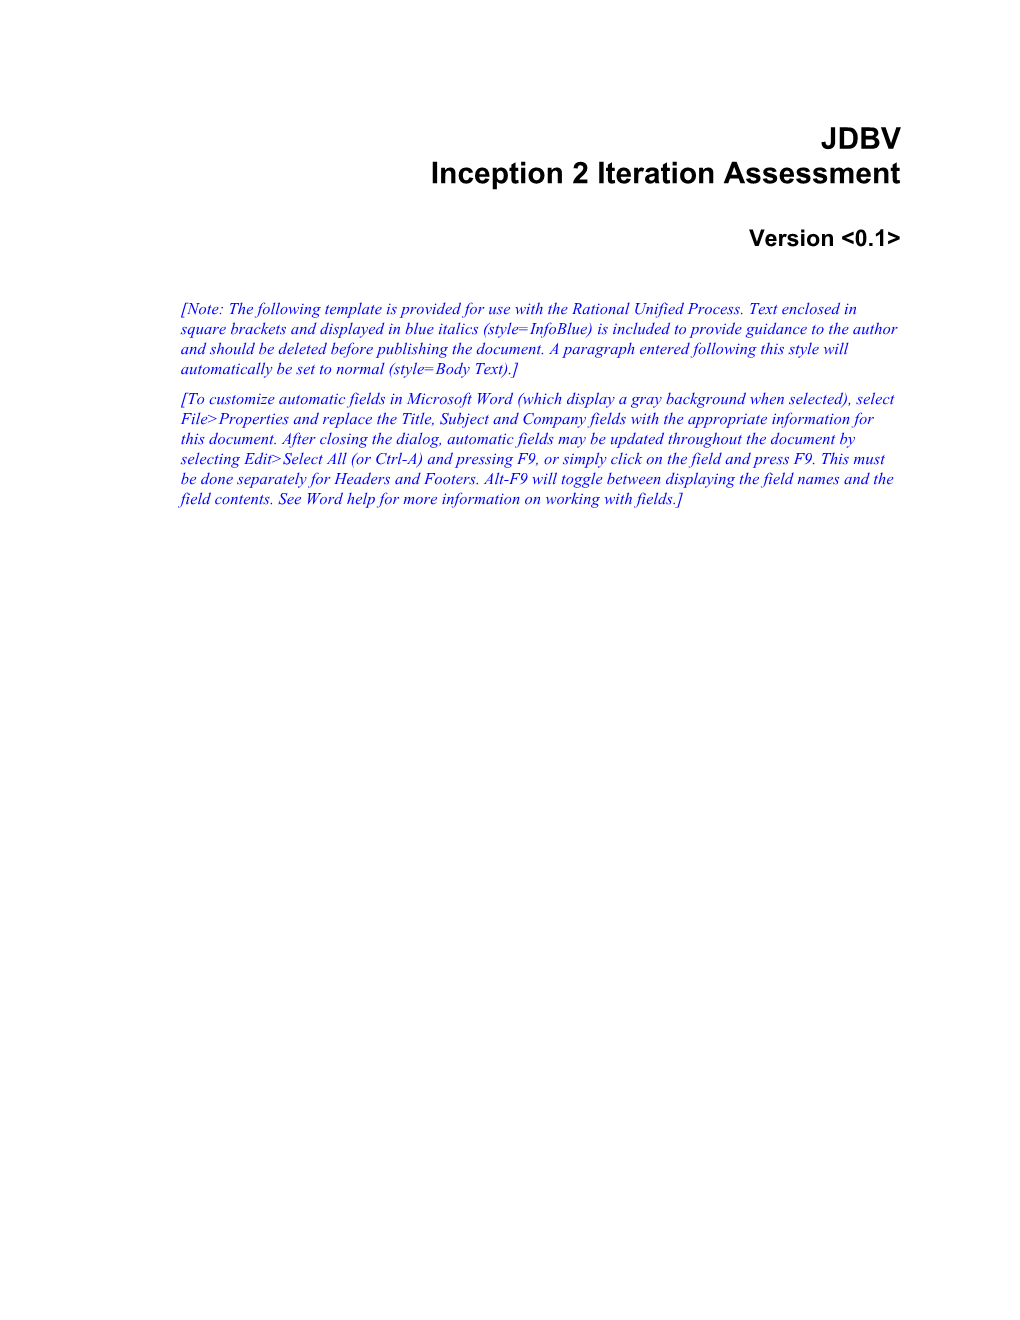 Inception 2 Iteration Assessment